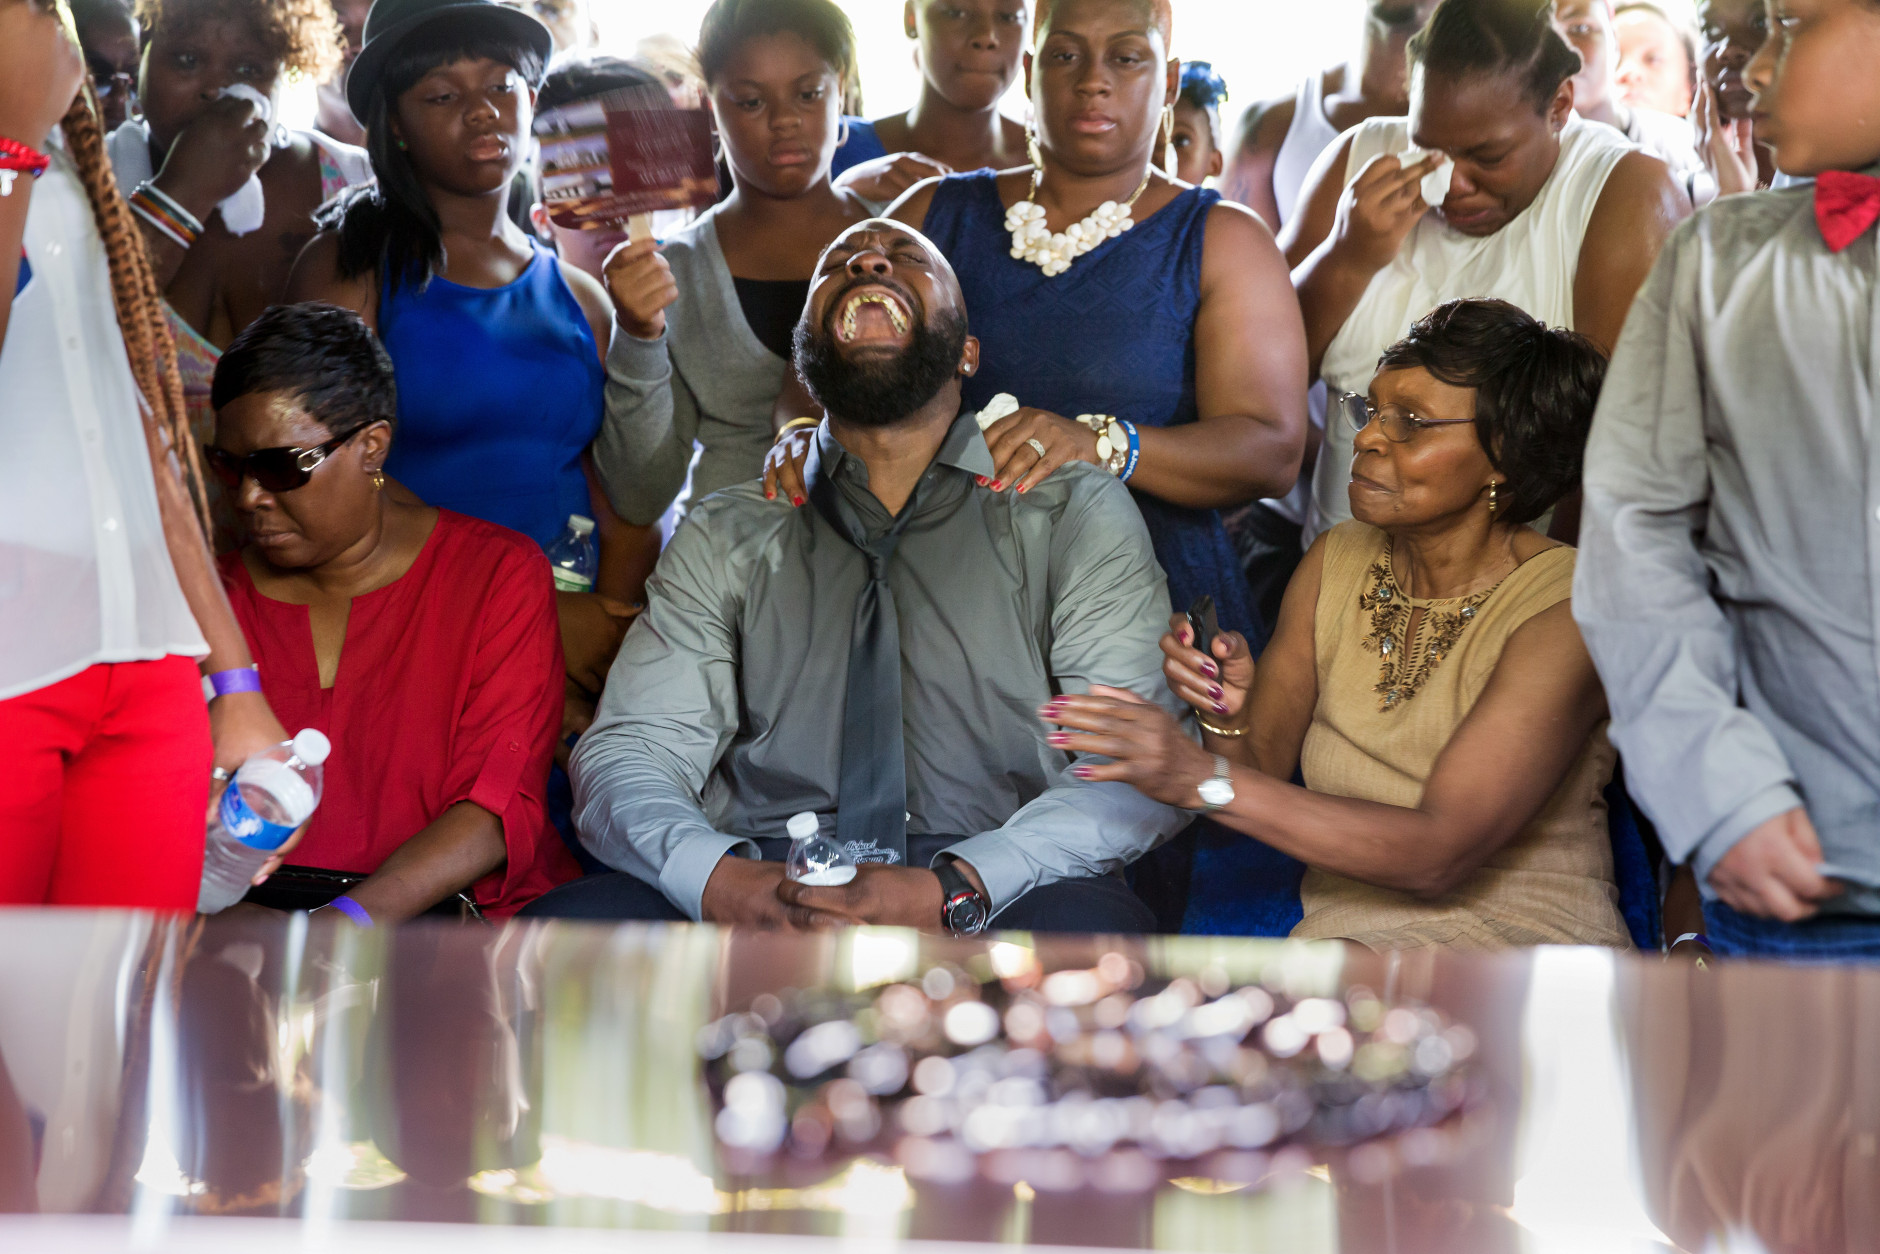 FOR USE AS DESIRED, YEAR END PHOTOS - FILE - Michael Brown Sr. yells out as the casket is lowered during the funeral service for his son Michael Brown in Normandy, Mo., Monday, Aug. 25, 2014. Hundreds of people gathered to say goodbye to Michael Brown, the 18-year-old shot and killed Aug. 9 in a confrontation with a police officer that fueled almost two weeks of street protests. (AP Photo/New York Times, Richard Perry, File Pool)